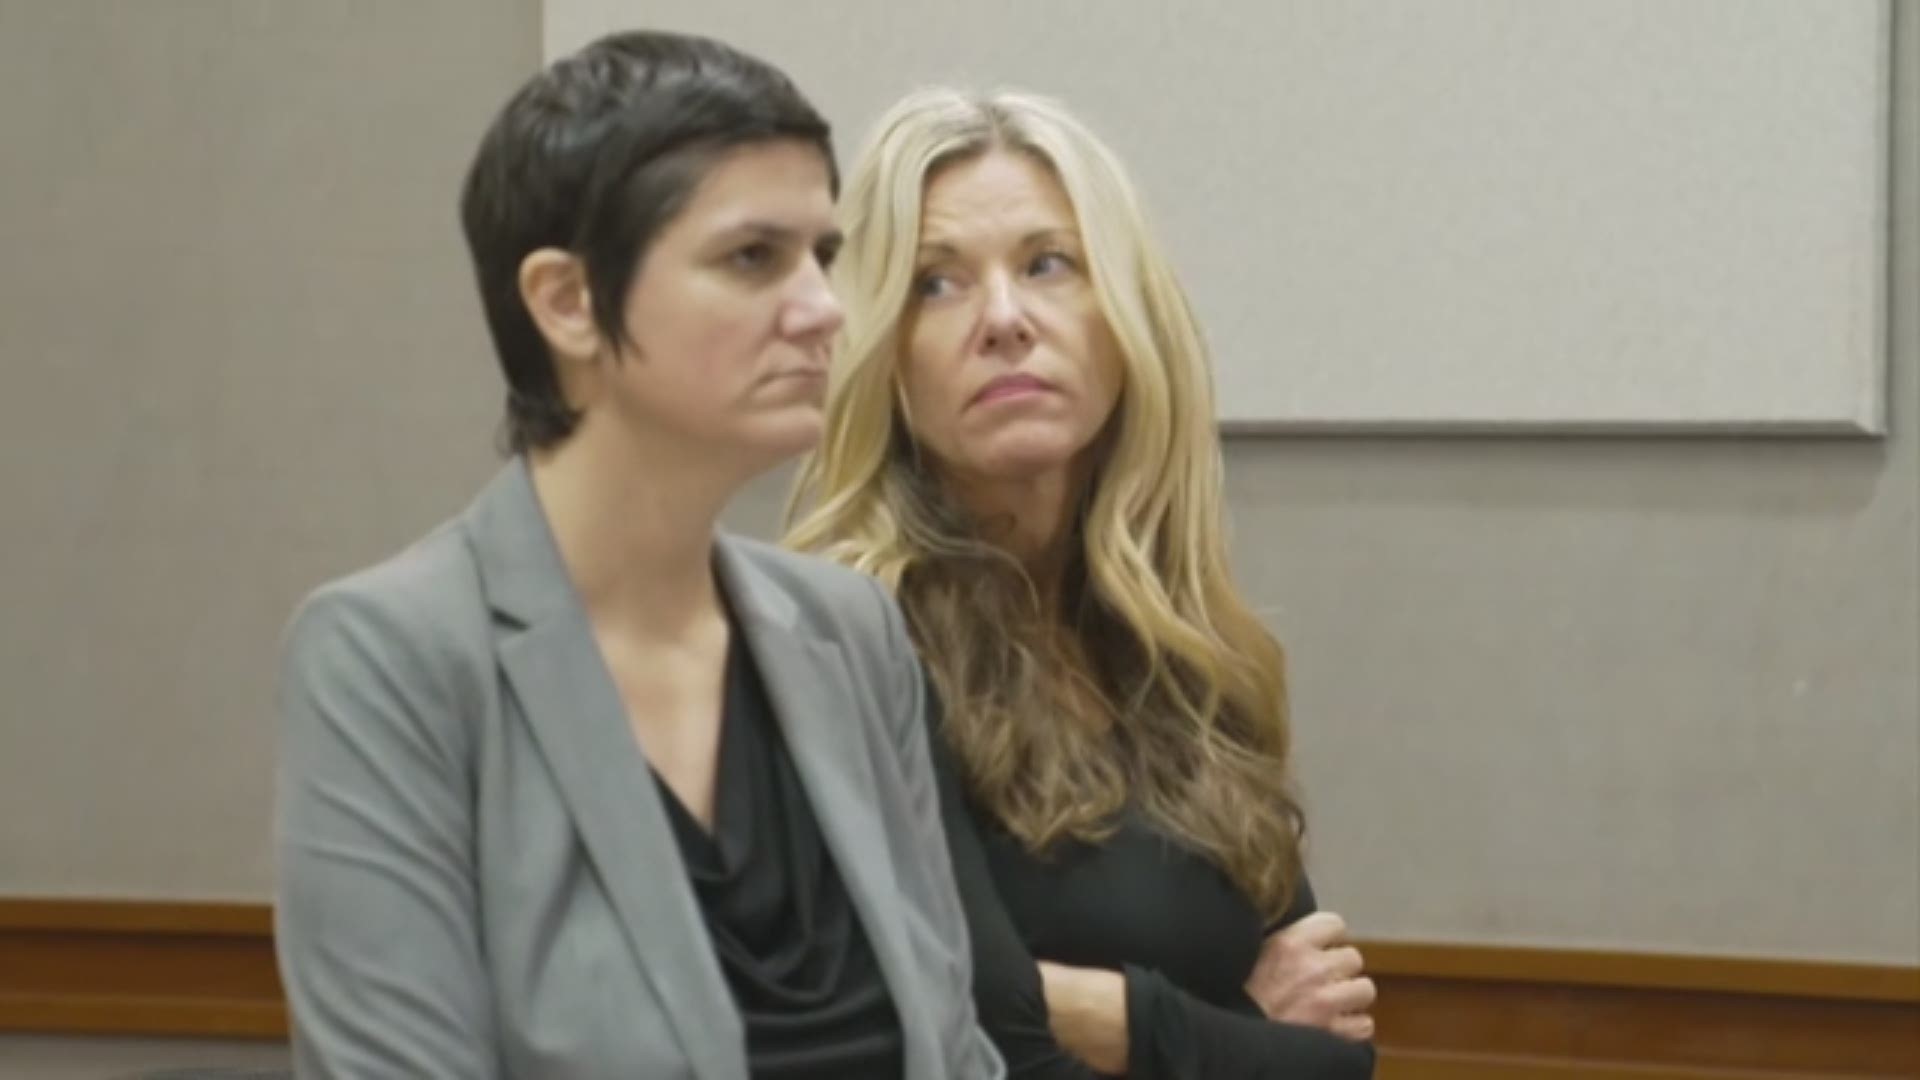 Lori Vallow's two kids, JJ and Tylee, haven't been seen in months. After she ignored a court order to produce them she was arrested in Hawaii. She appeared in court.